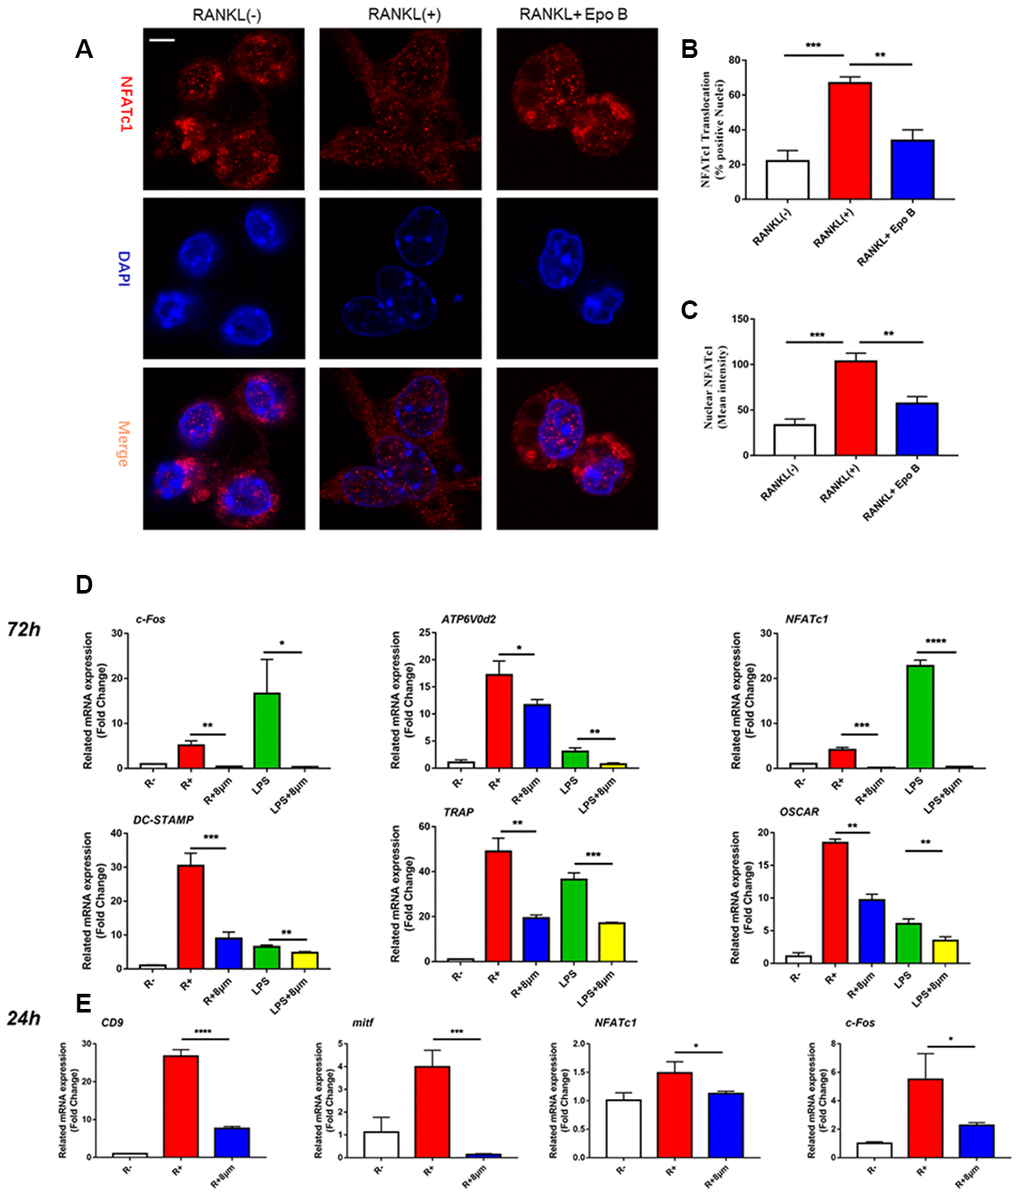 Epothilone B suppressed NFATc1 nuclear translocation and the expression of marker genes during osteoclastogenesis. (A) Representative images of immunofluorescence staining of the nuclear translocation of NFATc1 in the absence of presence of Epothilone B. Scale bar = 800 μm. (B) Quantitative analysis of the percentage of positive cells (NFATc1 translocation from cytosol to nuclear) in all cells. (C) Quantitative analysis of the mean intensity of NFATc1 in the cells nuclear. (D) Relative expression of marker genes in the procedure of osteoclastogenesis from monocytes to mature osteoclasts on mRNA level. (E) Relative expression of marker genes in the early stage of osteoclastogenesis on mRNA level.